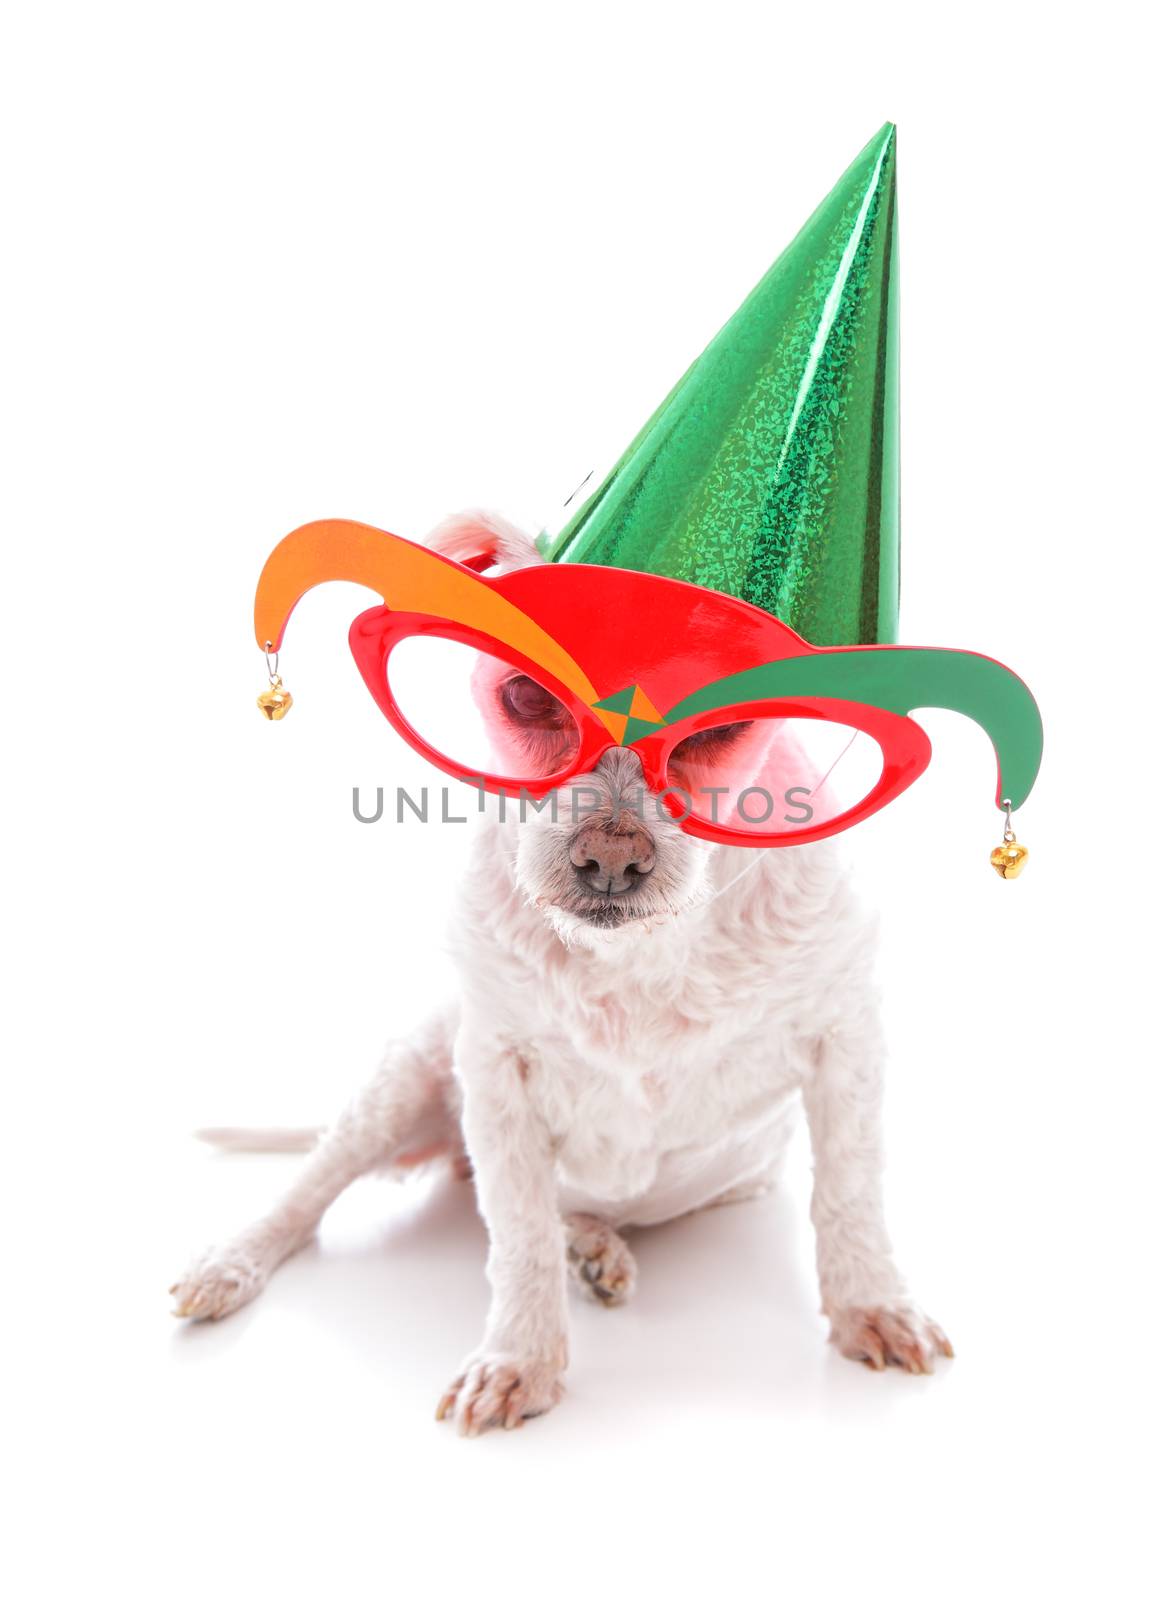 Pet with party hat and court jester glasses by lovleah